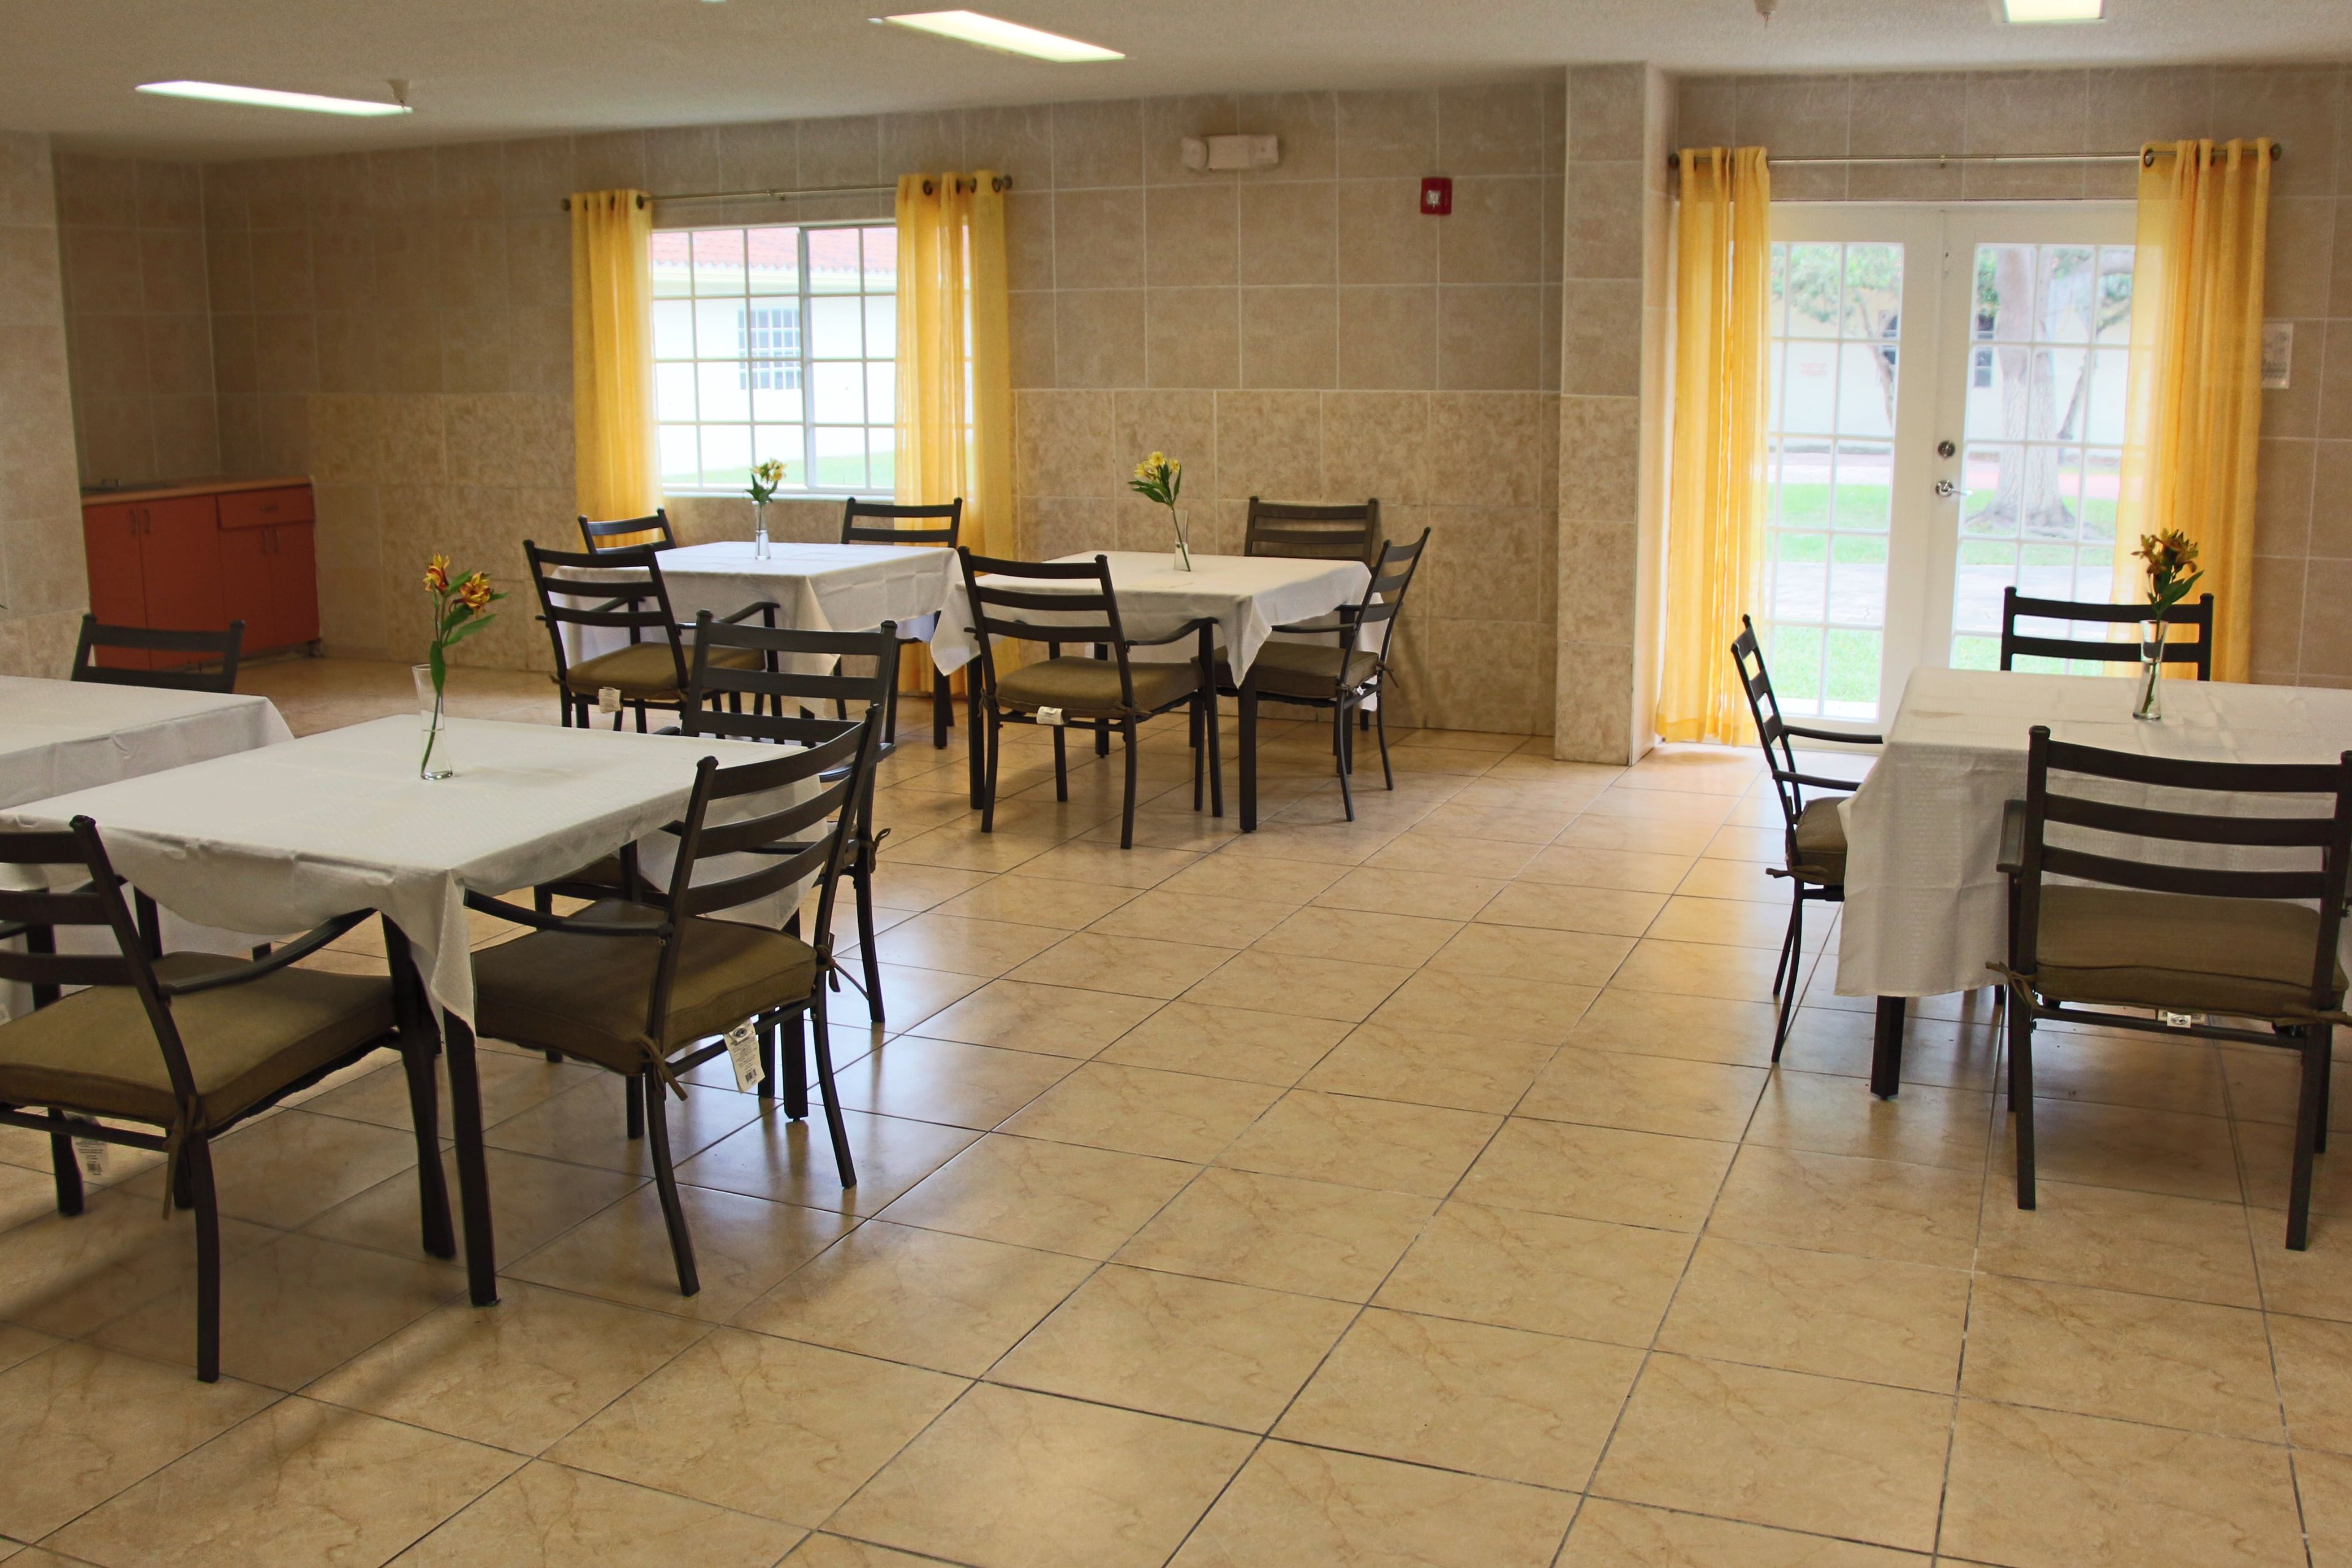 Floridian Gardens Assisted Living Facility 2